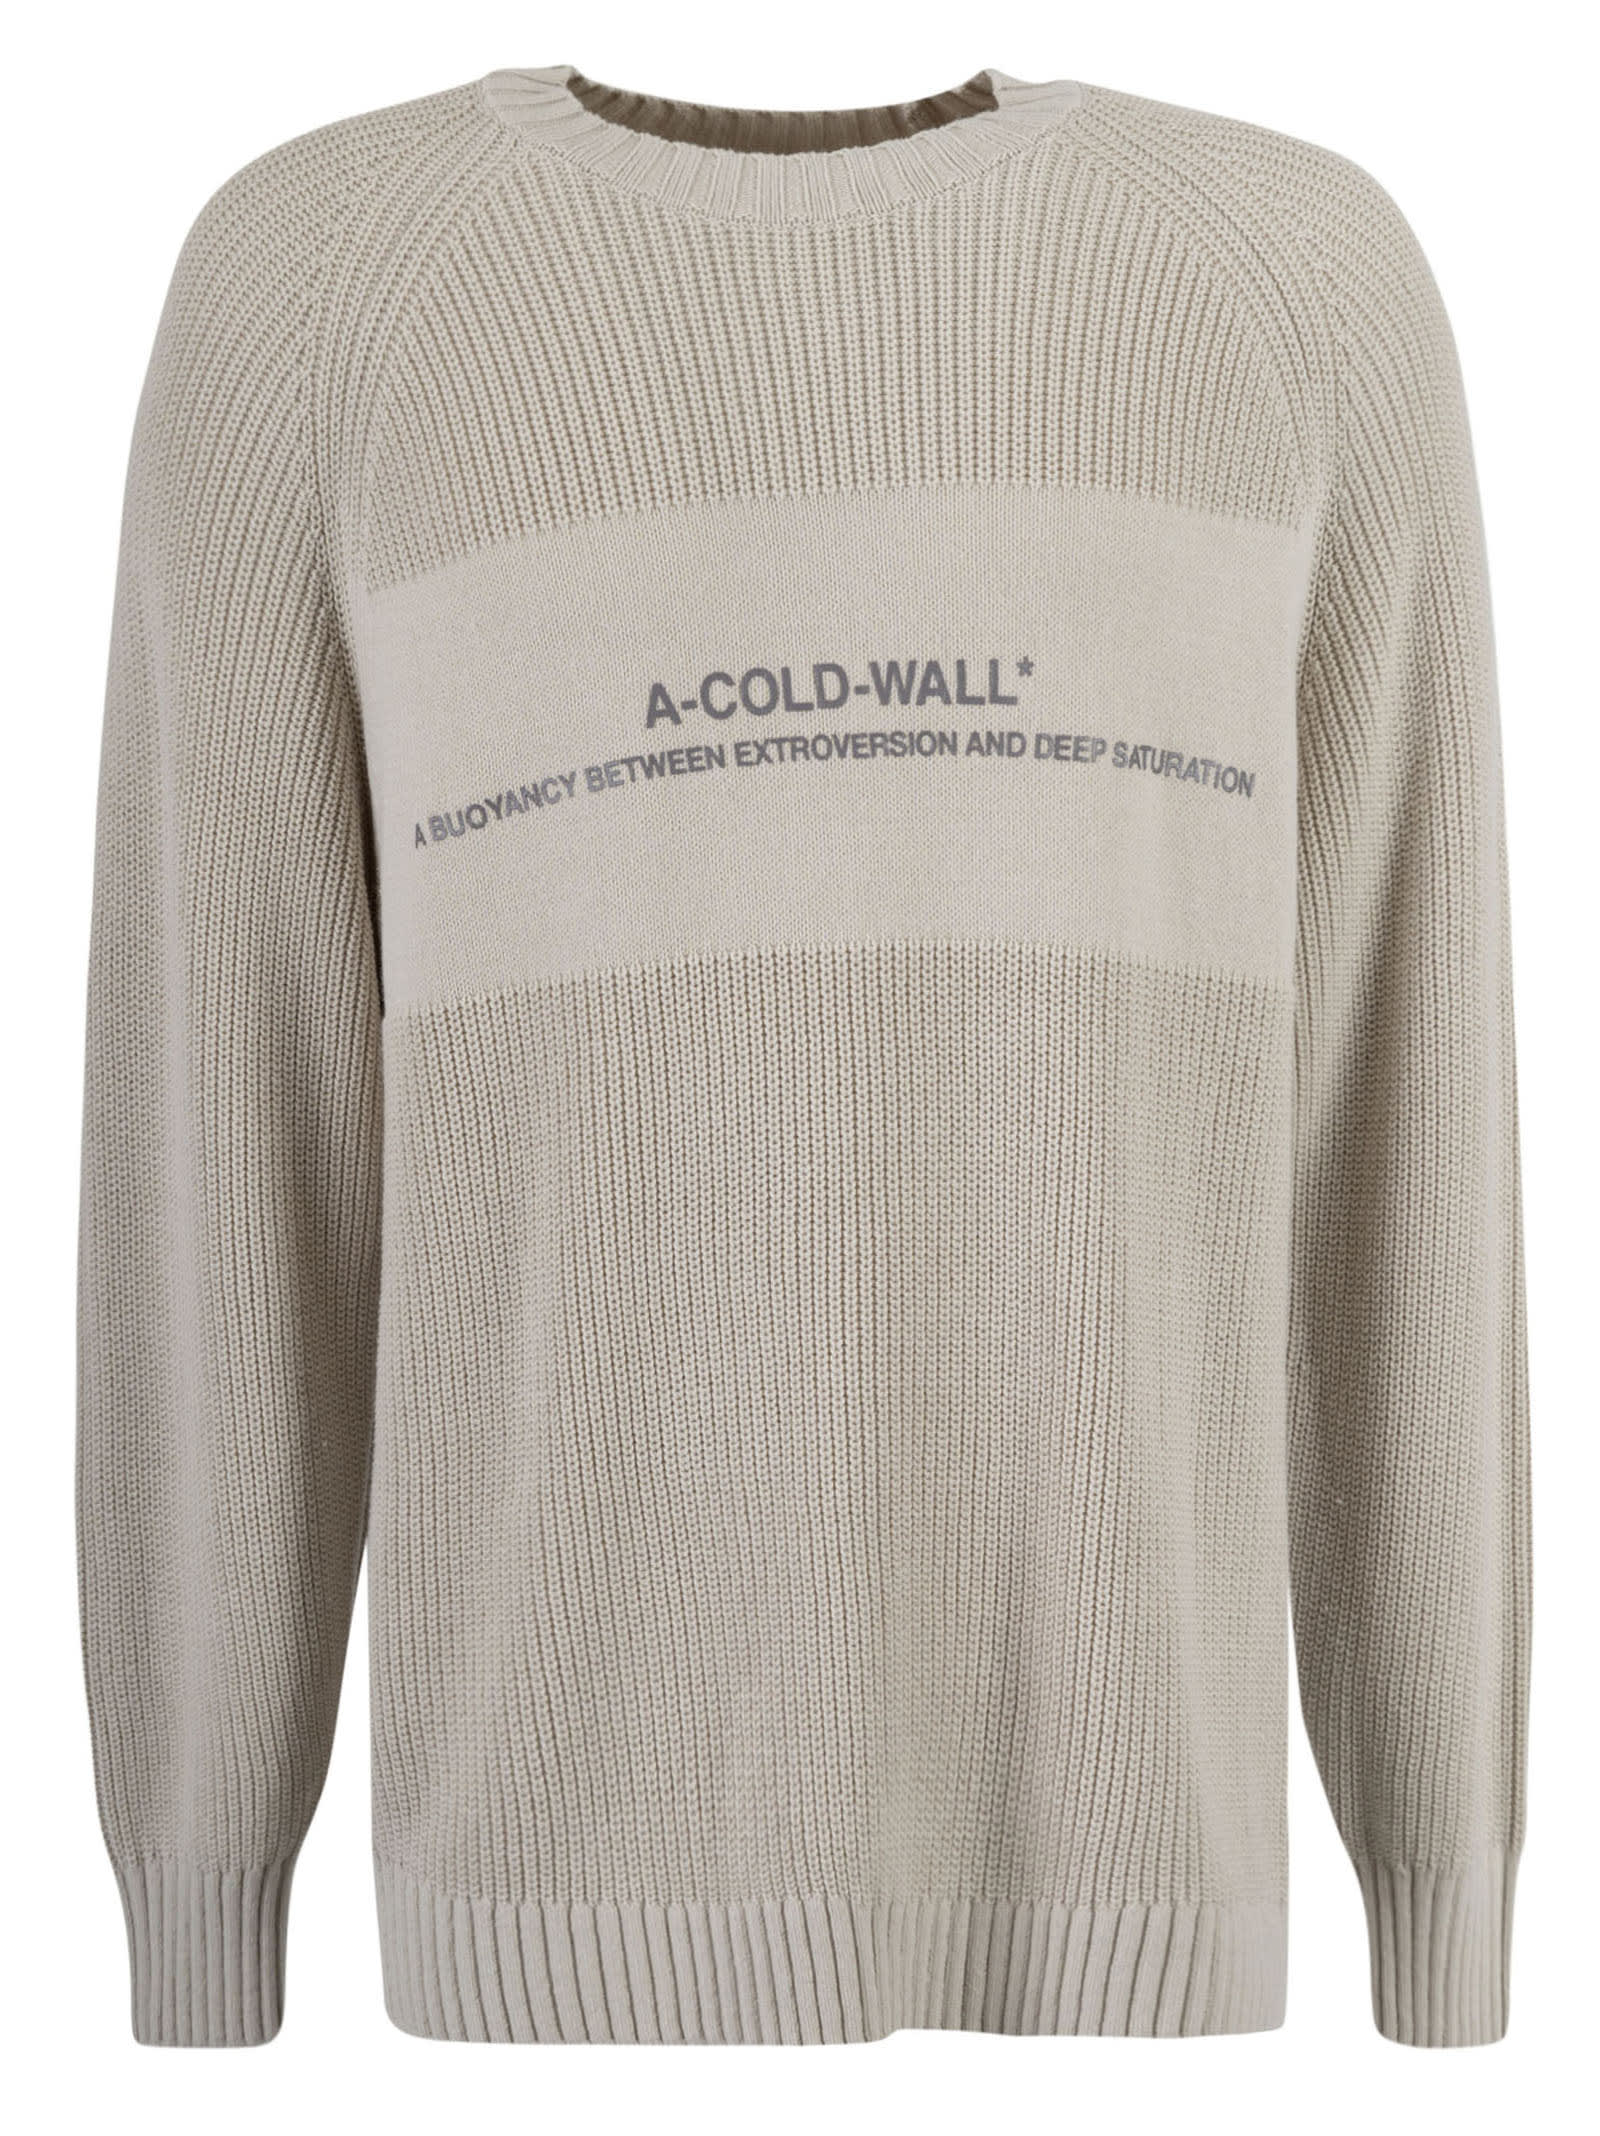 A-COLD-WALL Knitted Dialogue Knit Sweatshirt